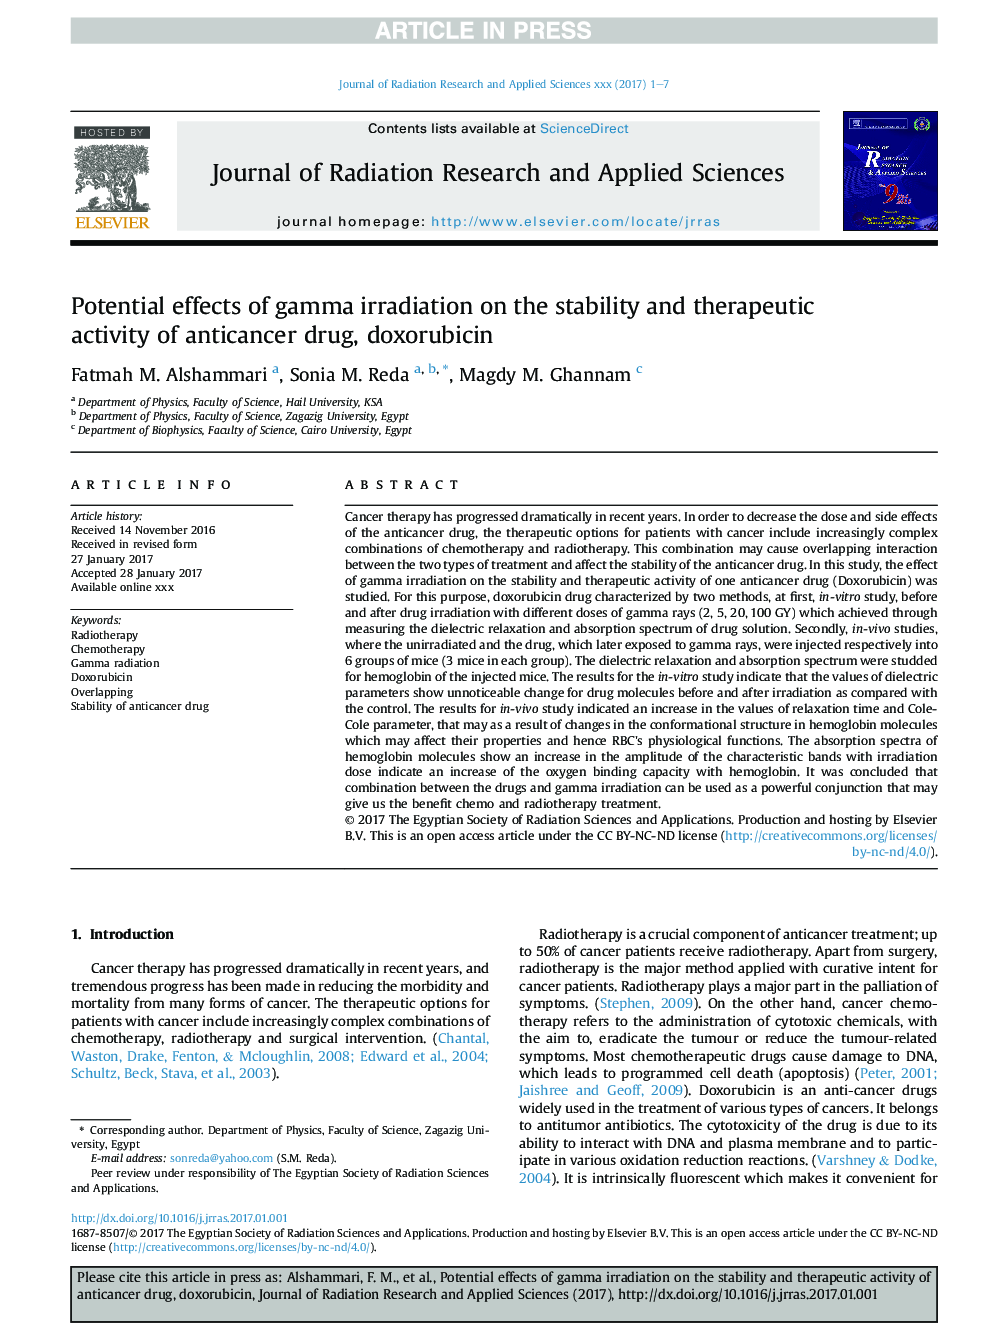 Potential effects of gamma irradiation on the stability and therapeutic activity of anticancer drug, doxorubicin